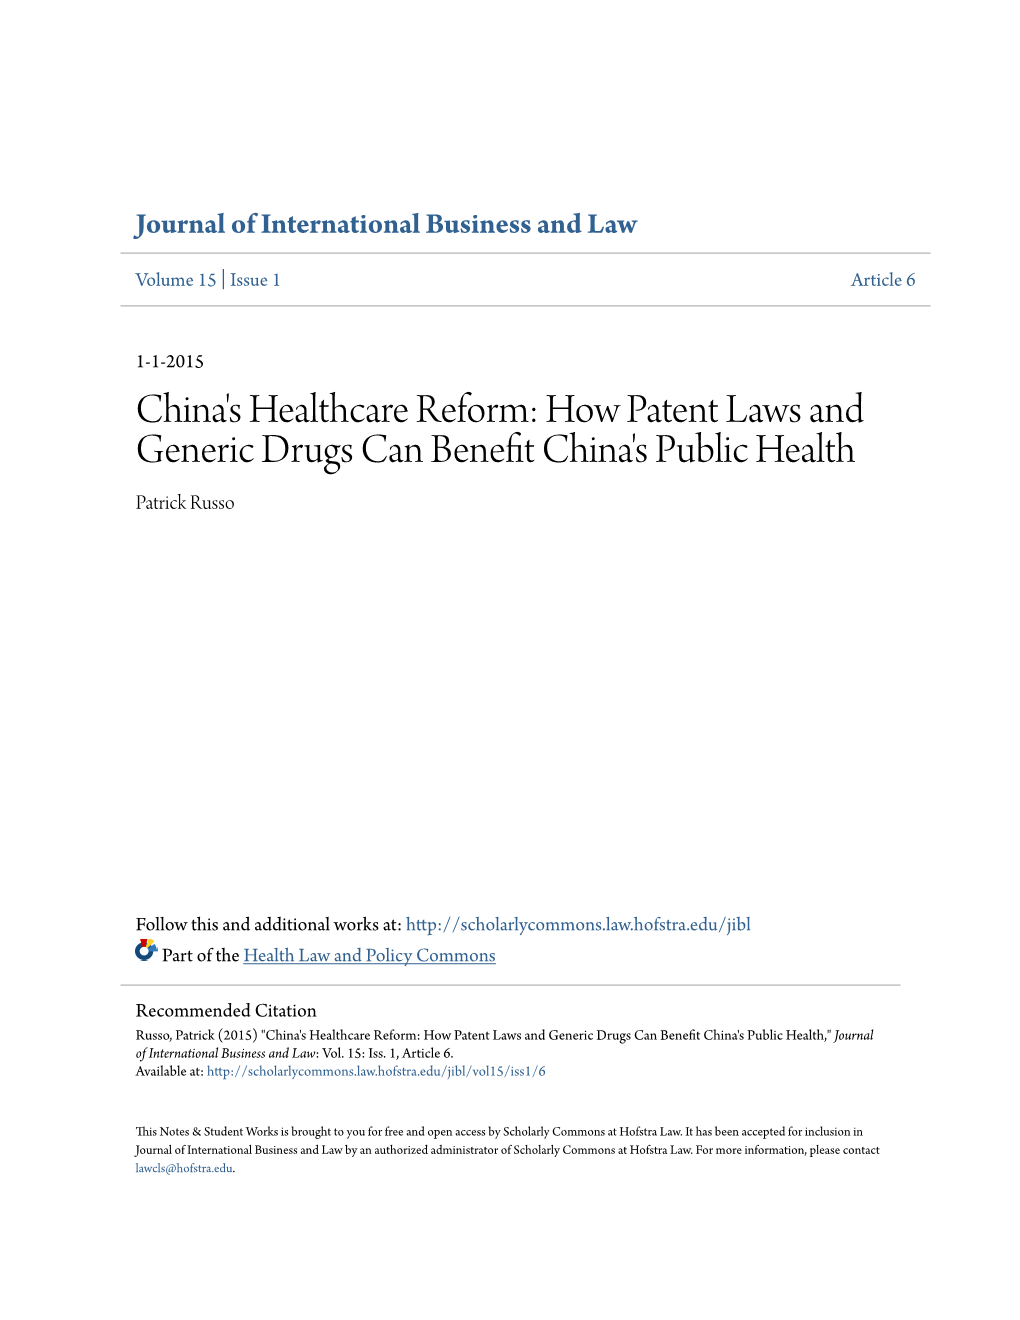 How Patent Laws and Generic Drugs Can Benefit China's Public Health